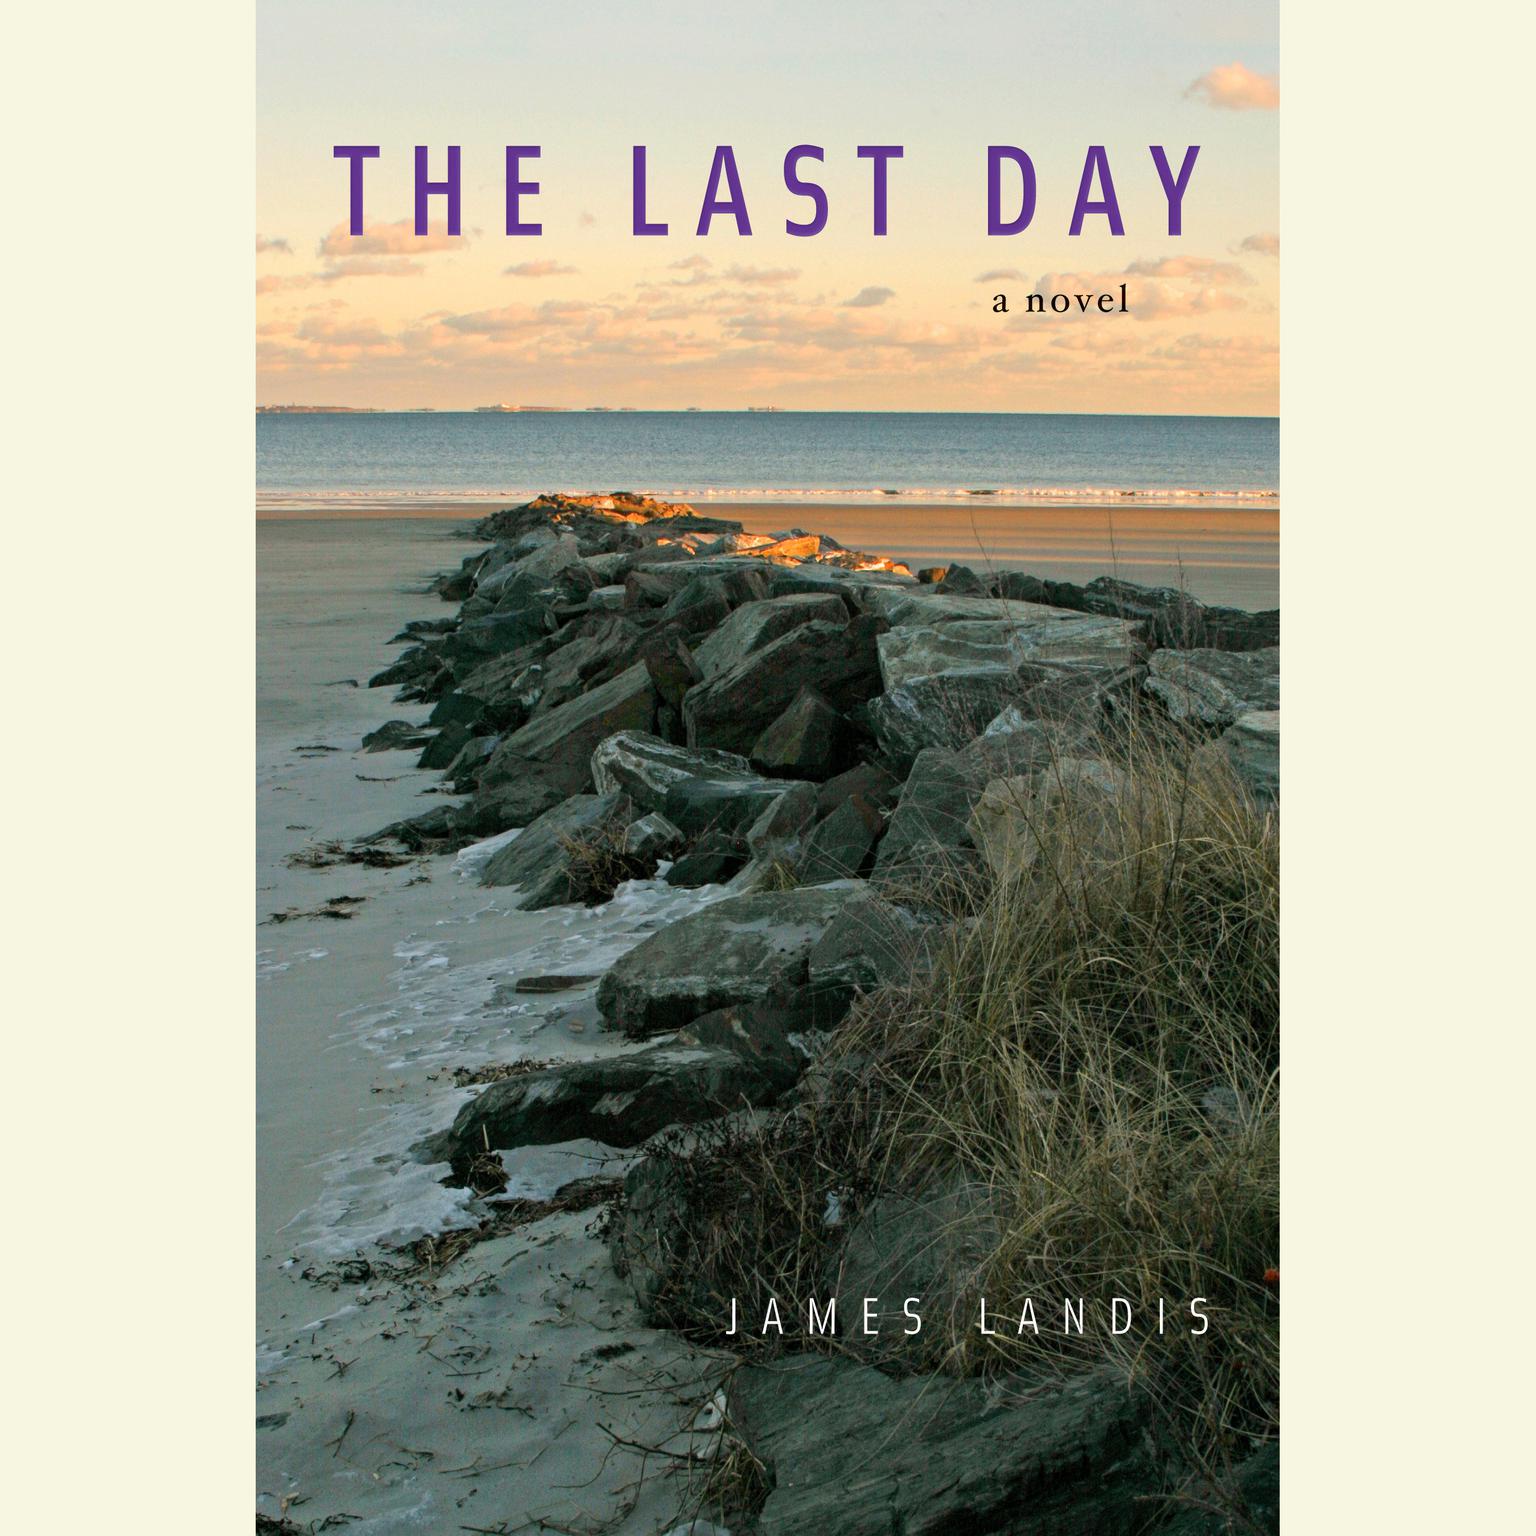 The Last Day: A Novel Audiobook, by James Landis